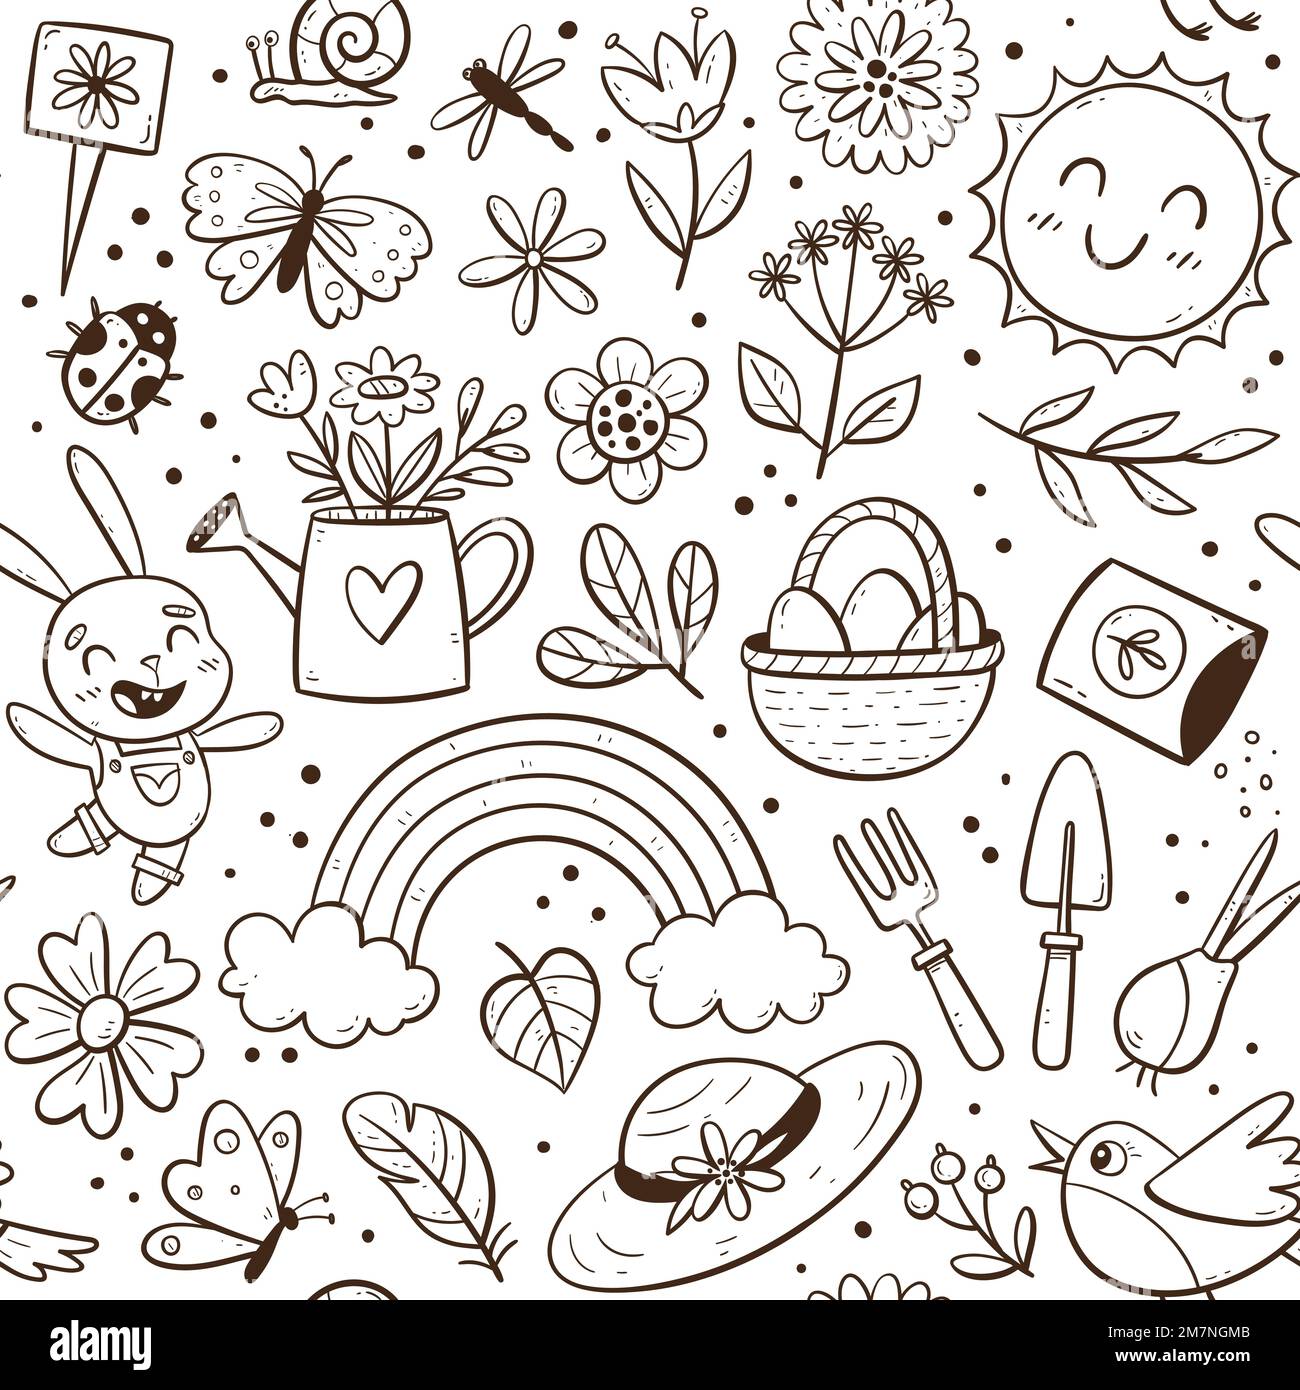 Hand drawn spring seamless pattern with seasonal elements. Flowers, plants and gardening tools. Doodle vector illustration with isolated elements. Stock Vector